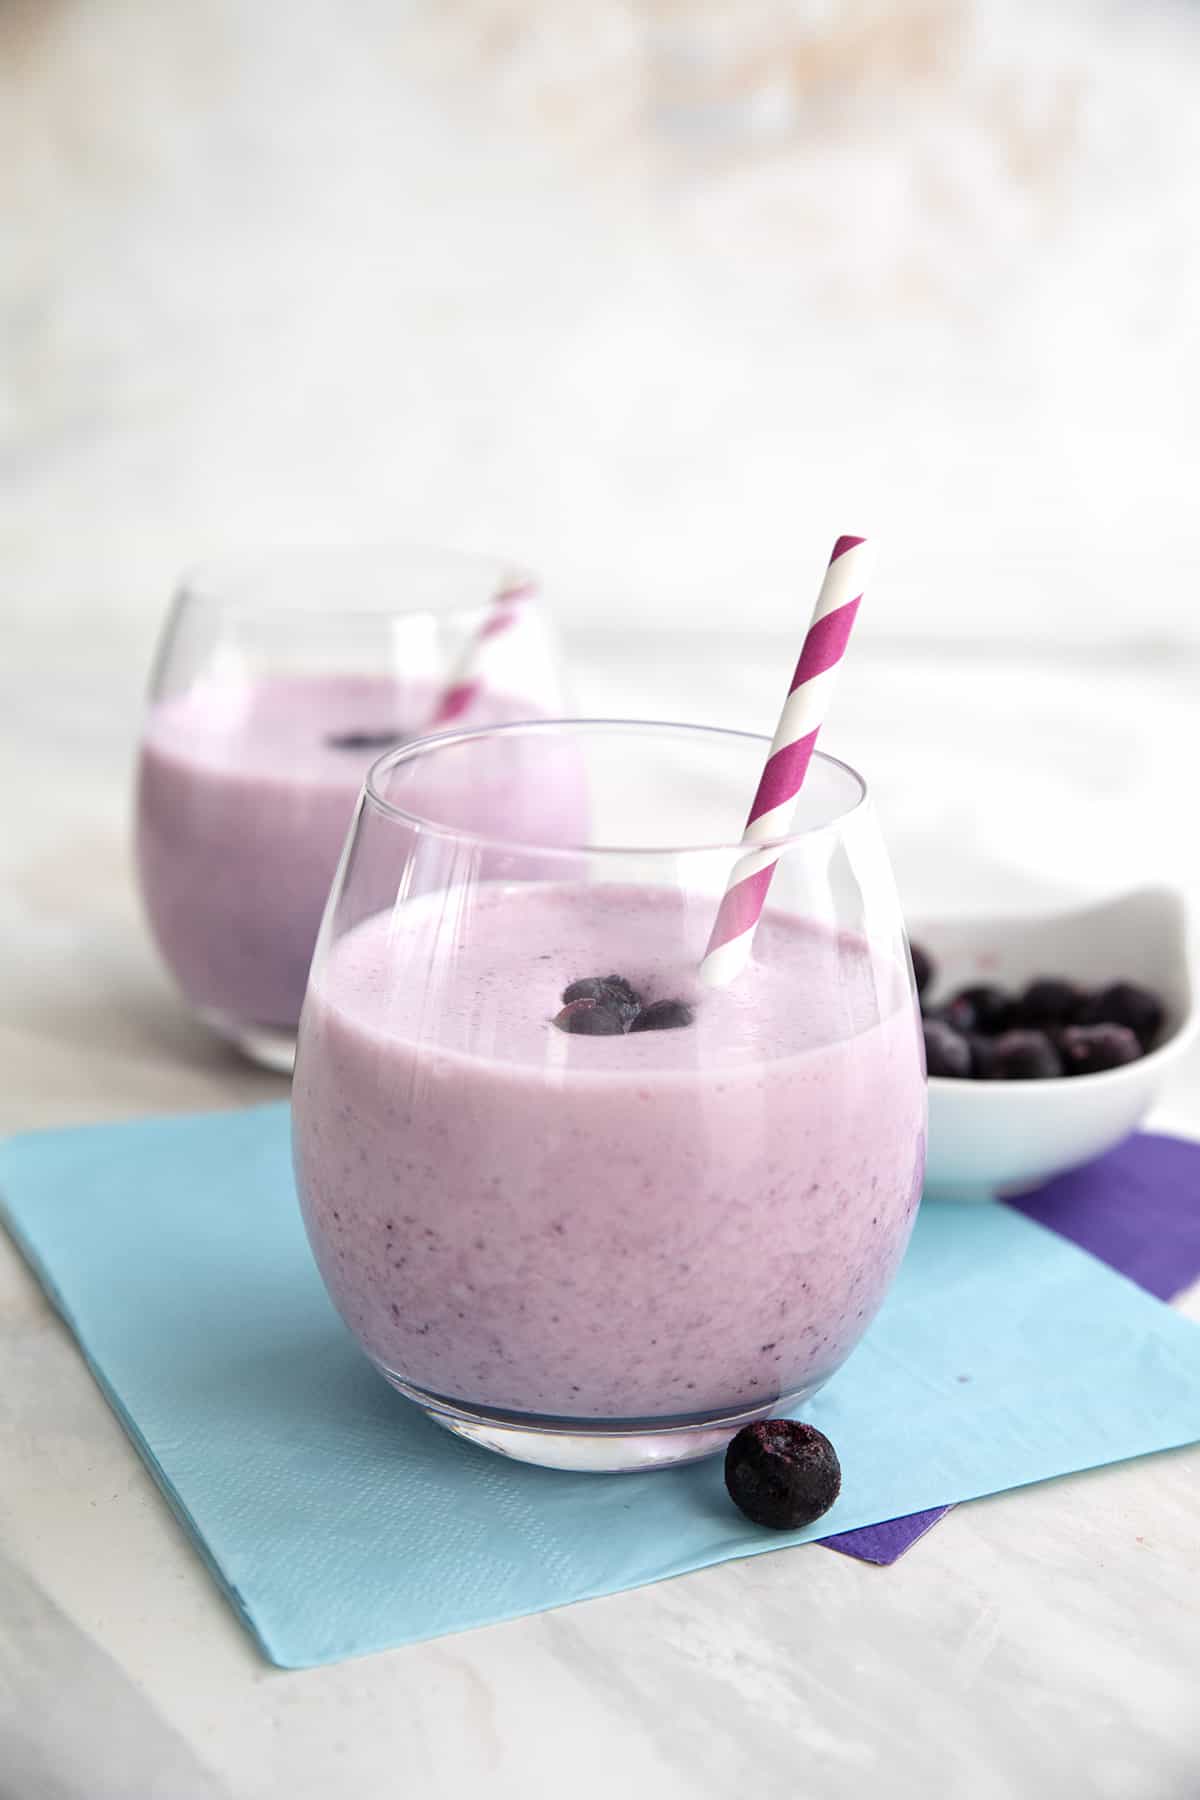 Two keto blueberry smoothies with striped straws sit over purple and blue napkins.